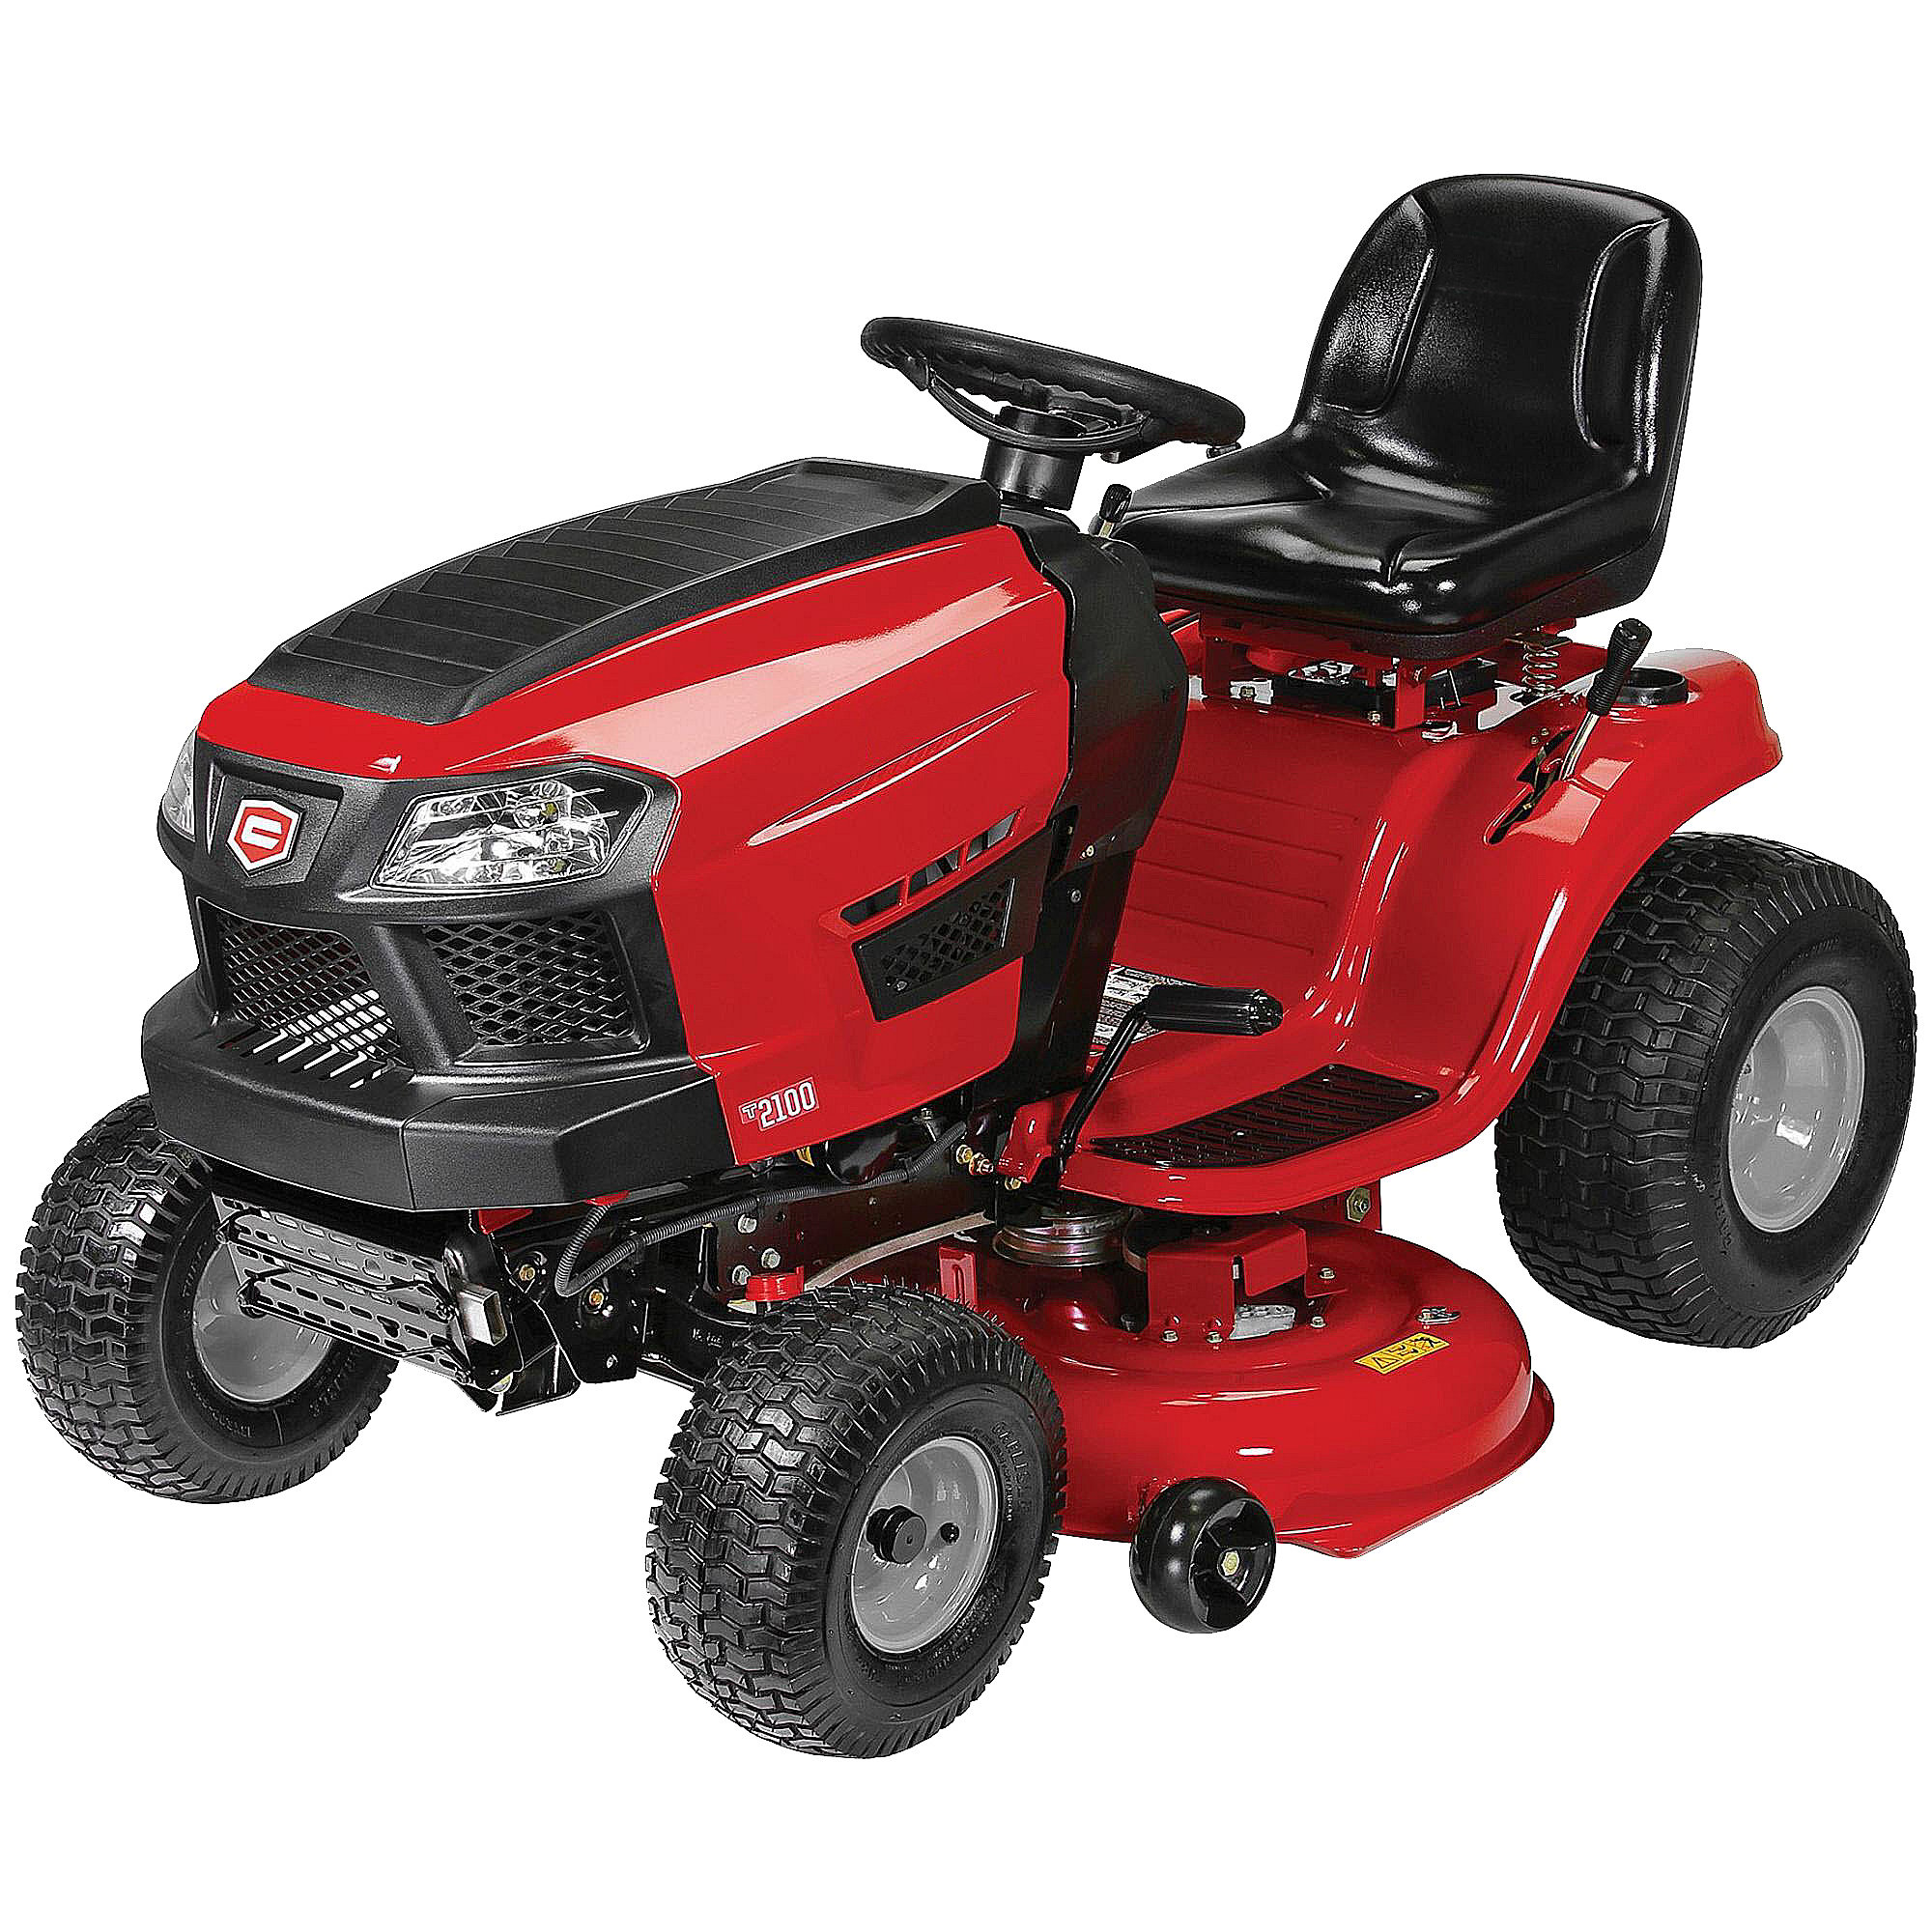 Common Riding Mower And Tractor Problems Mower Deck Vibrates Symptom Diagnosis